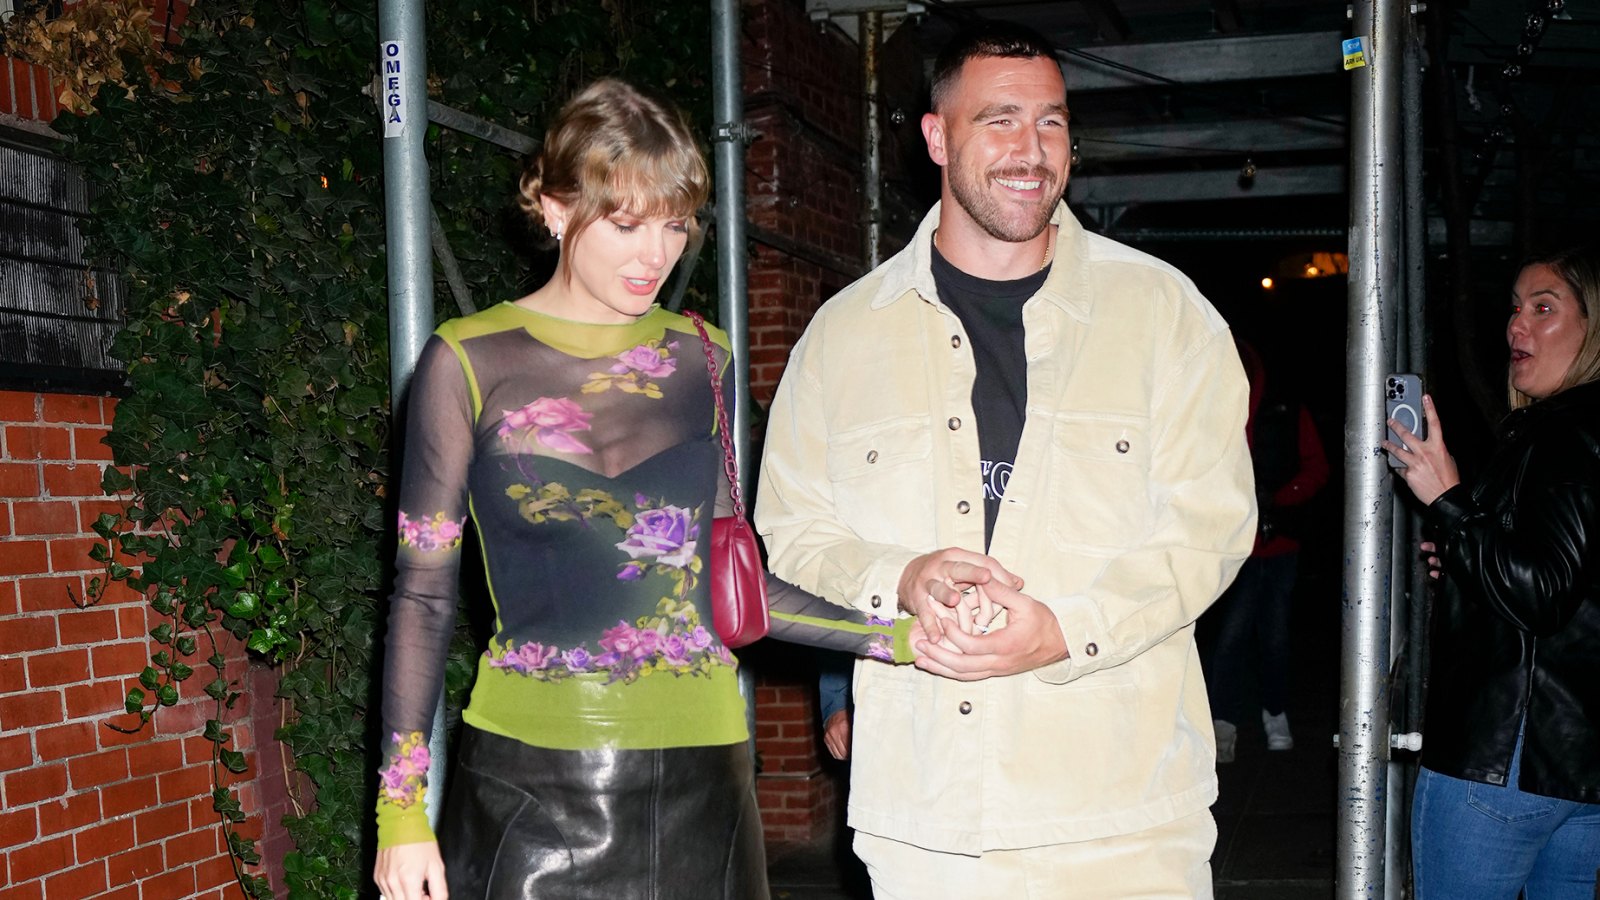 Taylor Swifts Cousin Danny Frye III Hints He Made Love Connection Between Singer and Travis Kelce